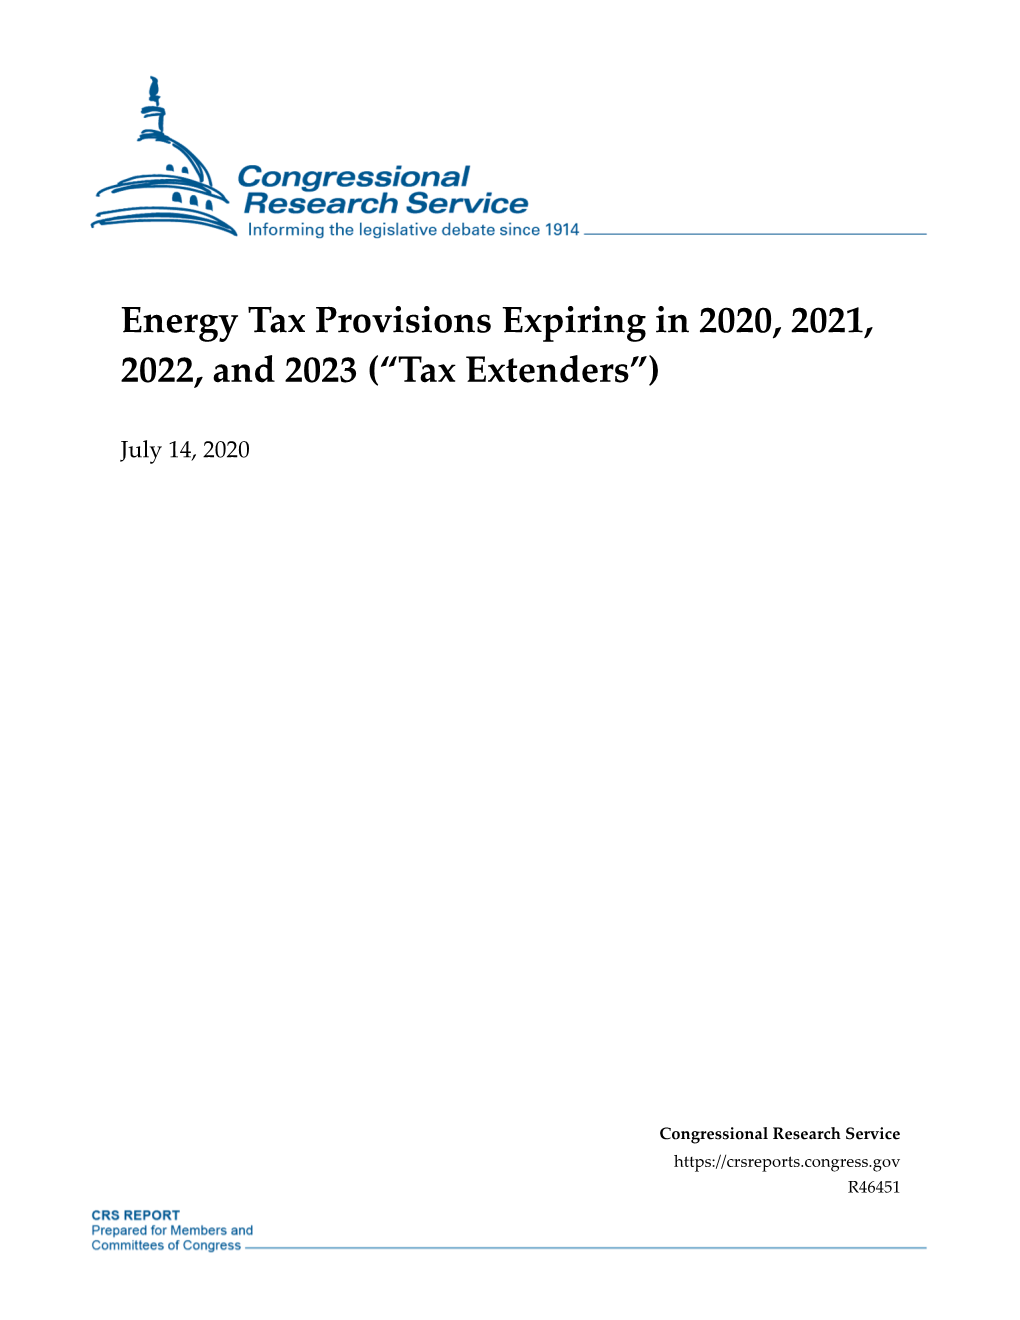 Energy Tax Provisions Expiring in 2020, 2021, 2022, and 2023 (“Tax Extenders”)